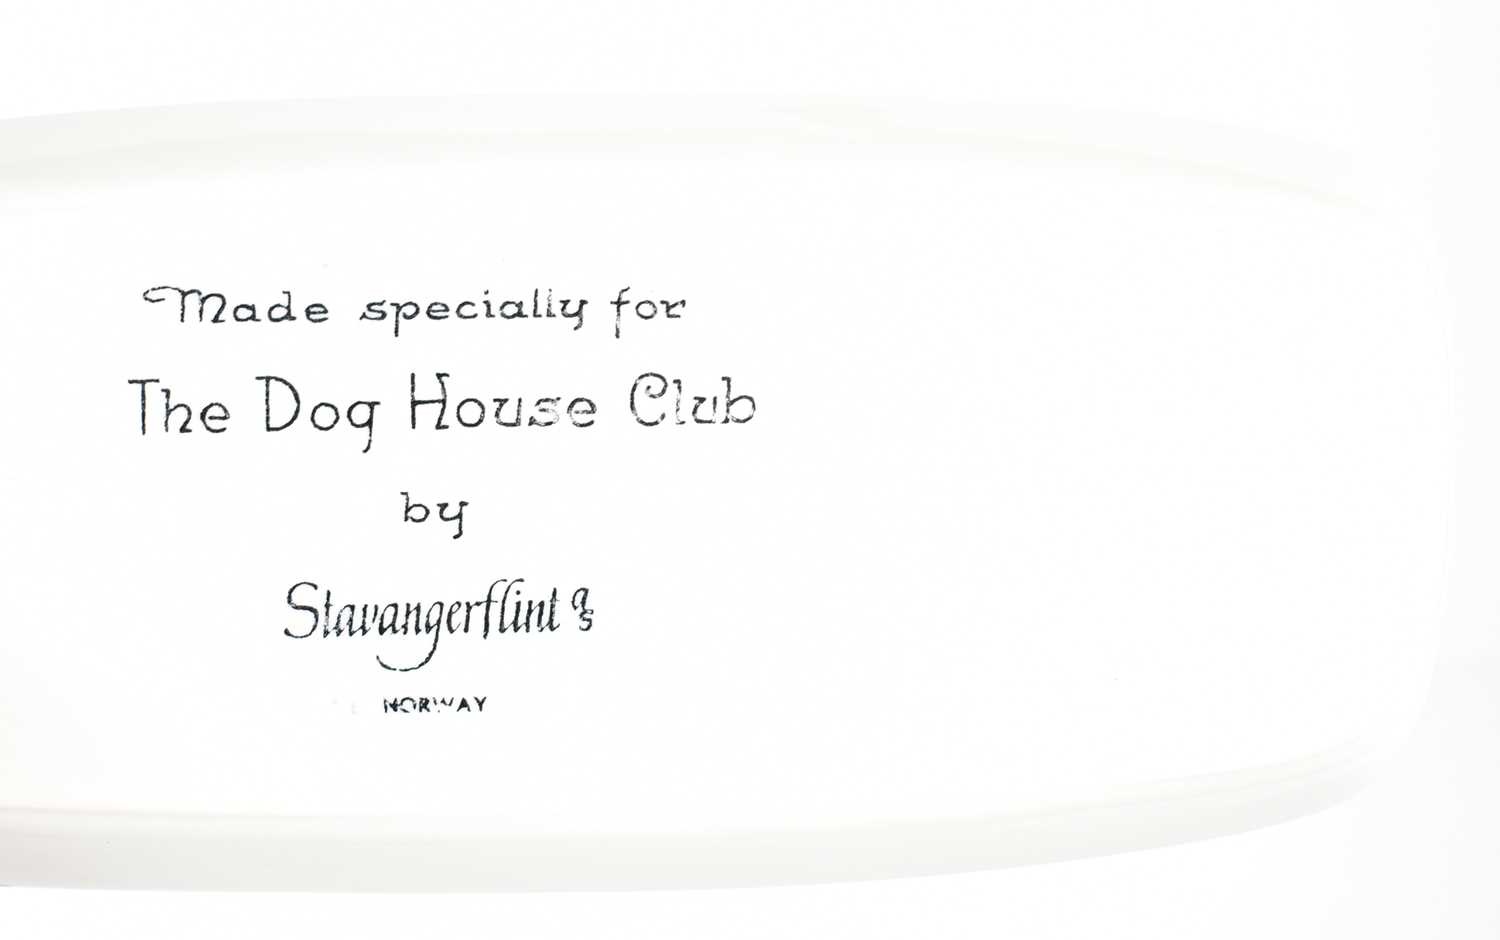 A Ceramic dish made specially for The Dog House Club by Stavangerflint of Norway featuring the - Image 2 of 2